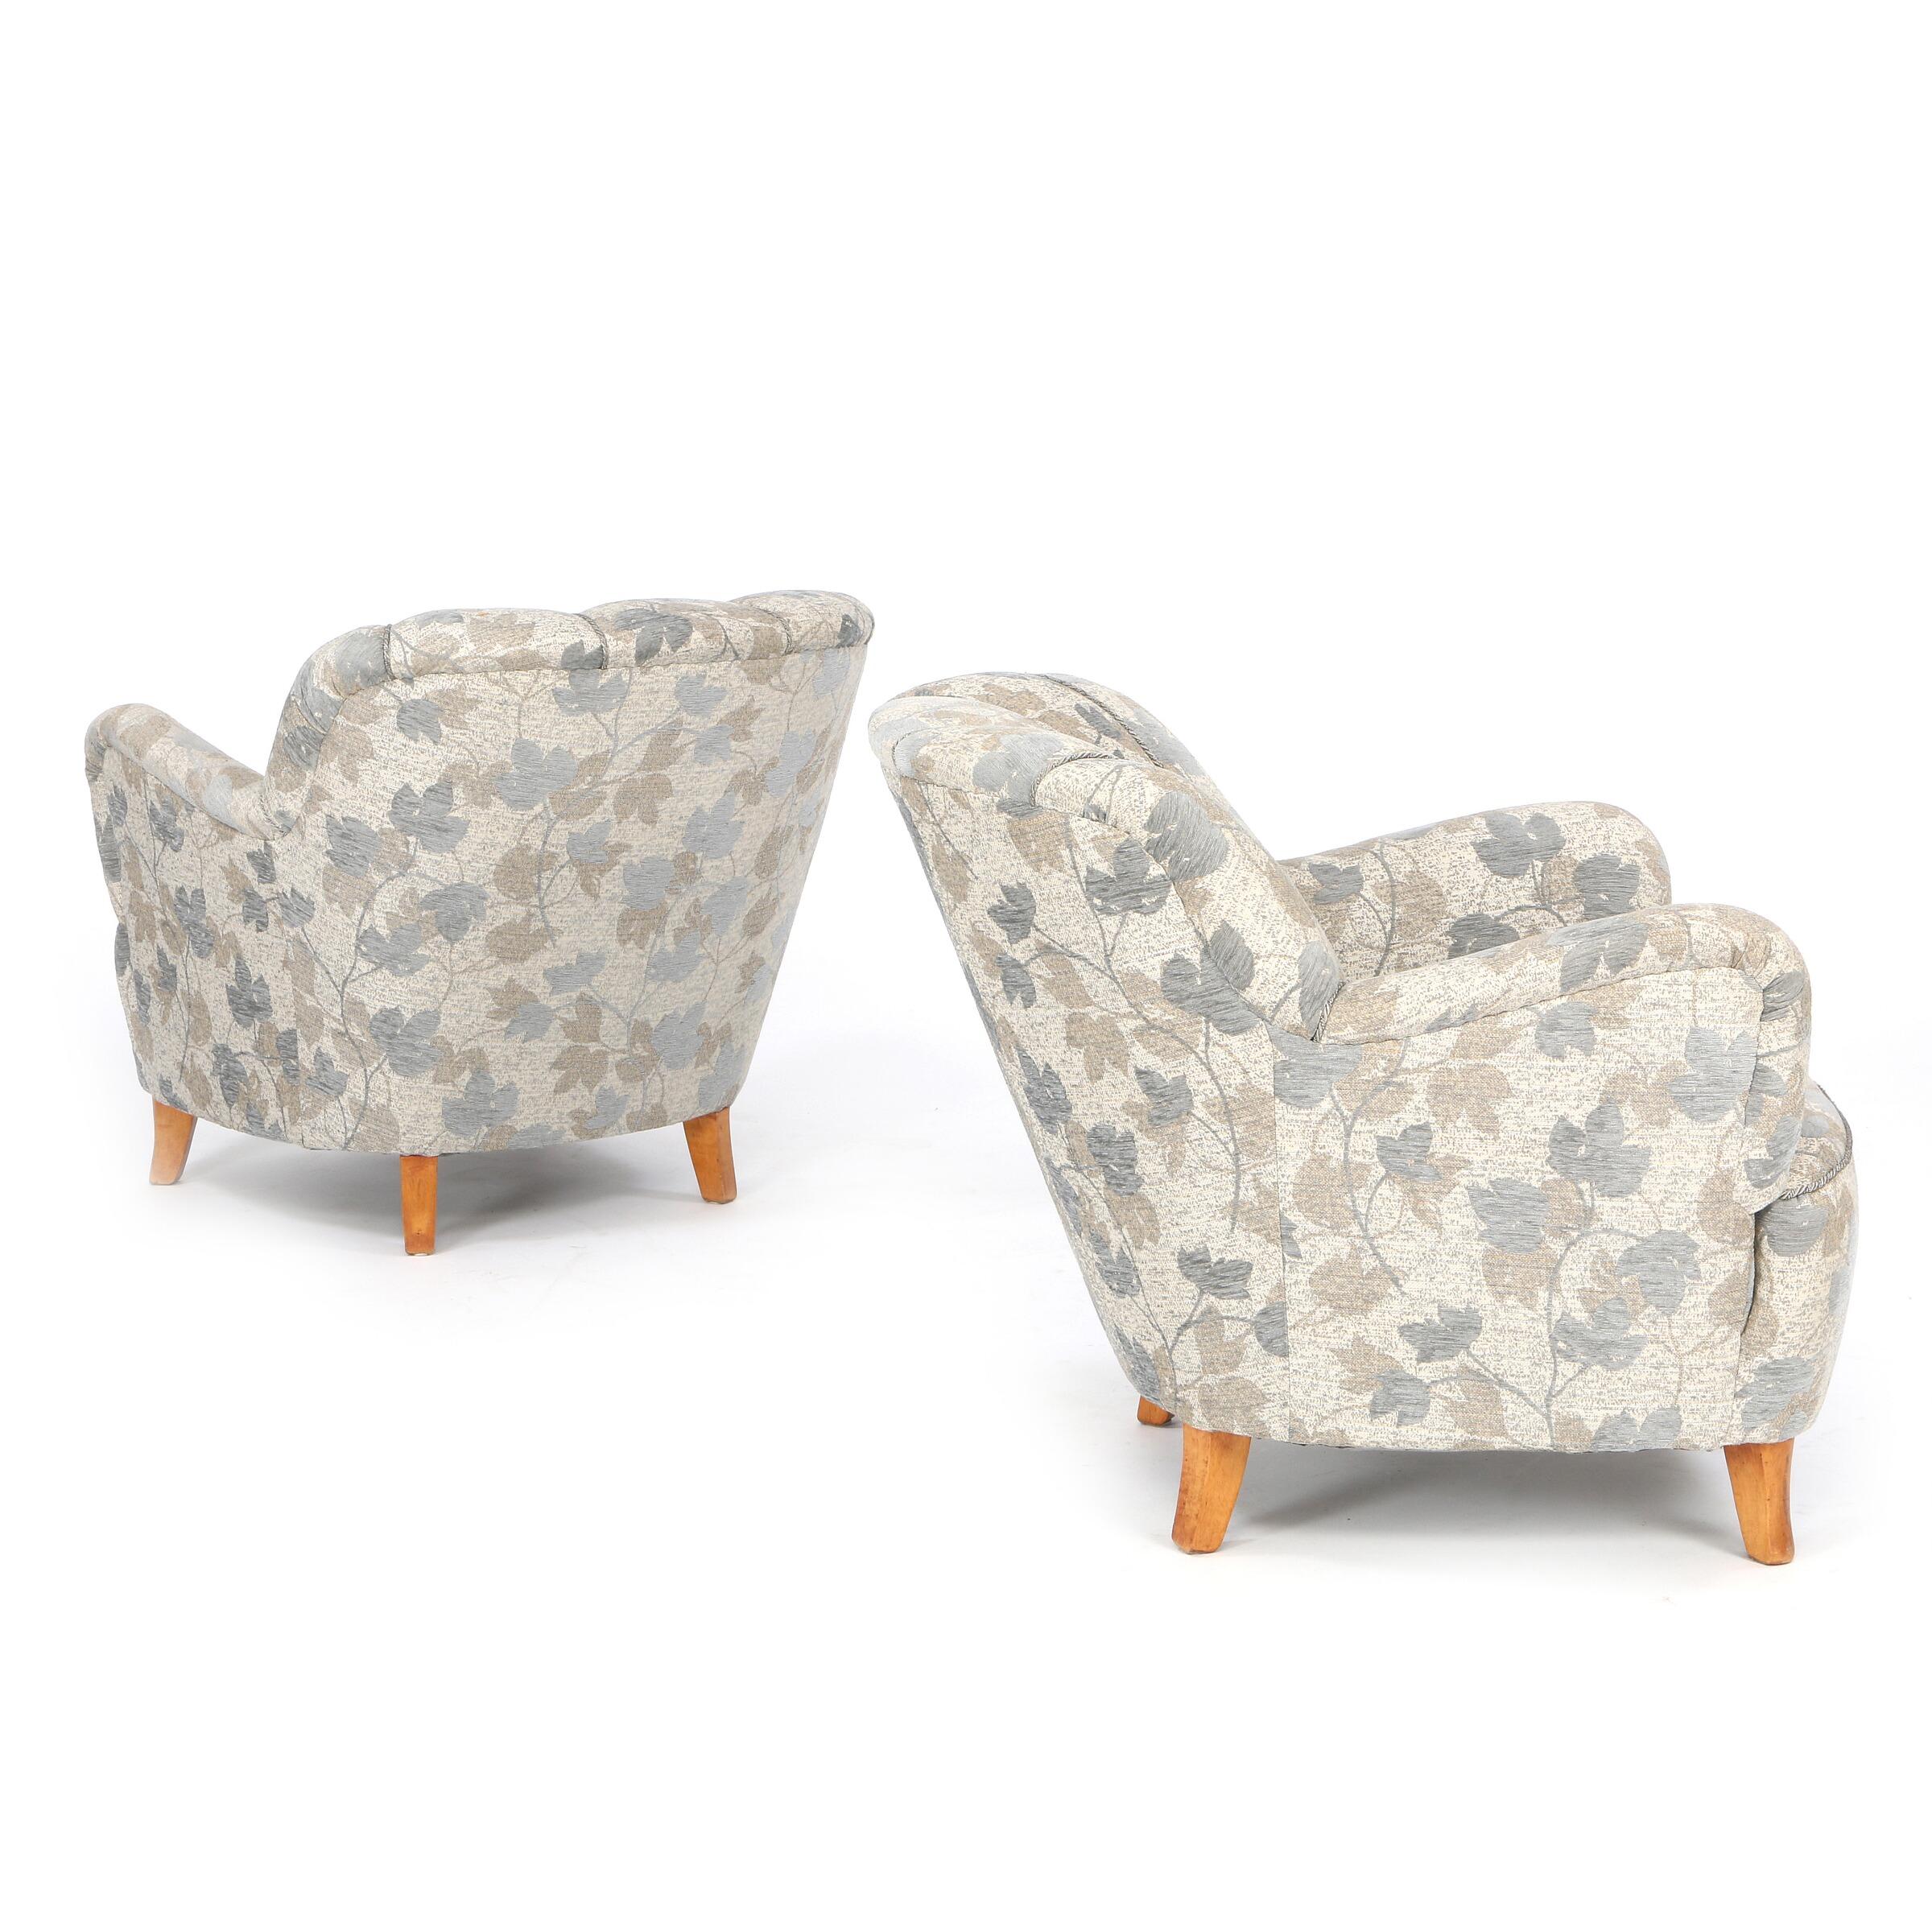 Swedish furniture design: A pair of comfortable easy chairs with channelled backs, legs of birch. Seat, sides and back upholstered with flowered grey wool. Manufactured by 1940s-1950s. There is a matching sofa.